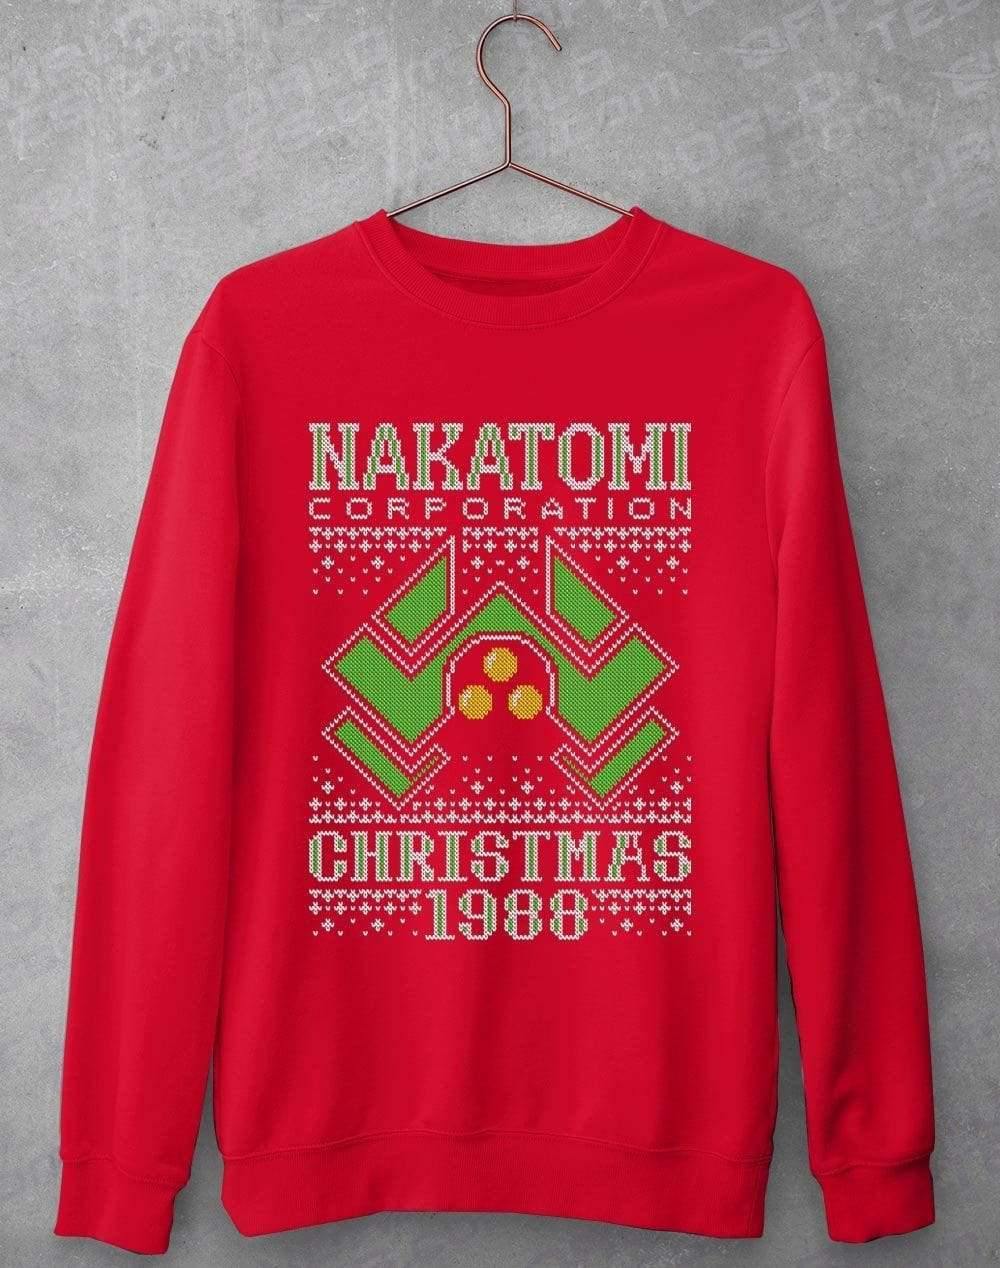 Nakatomi Christmas1988 Festive Knitted-Look Sweatshirt S / Fire Red  - Off World Tees